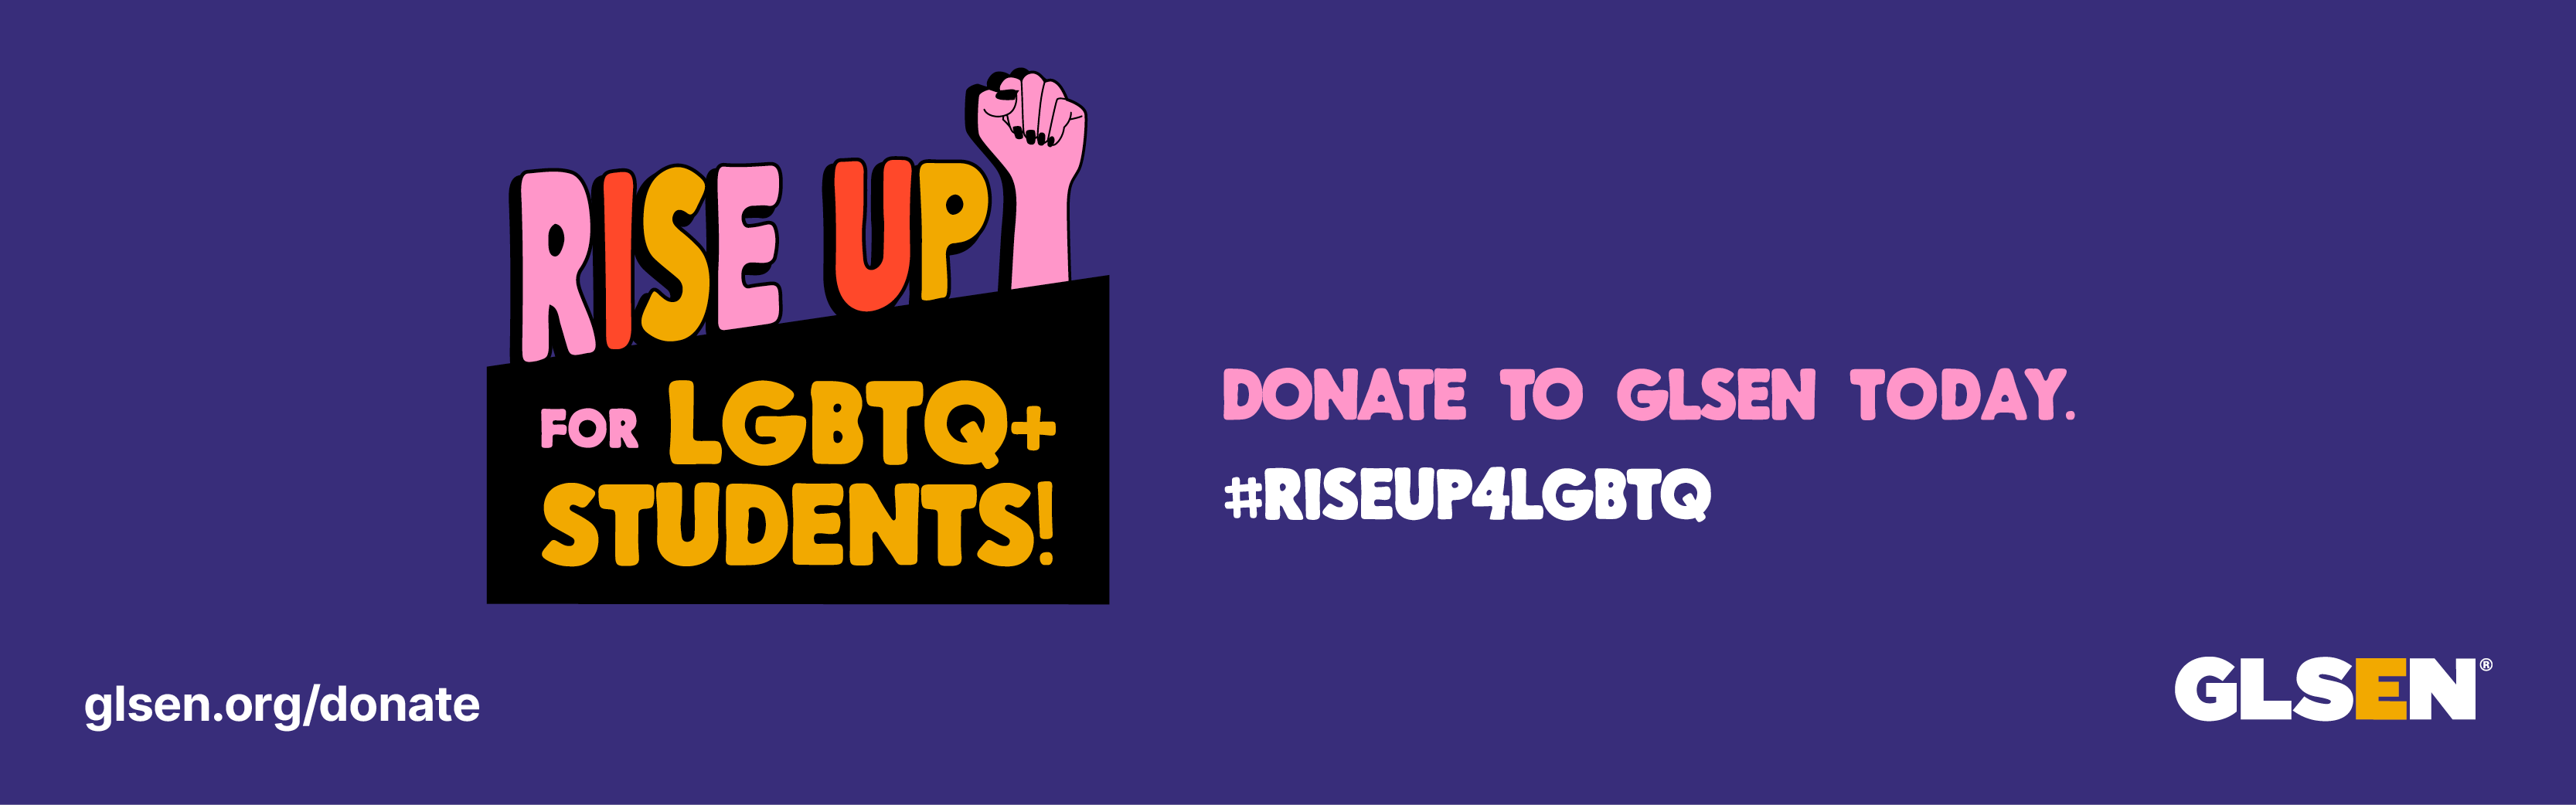 Rise Up for LGBTQ+ students! Donate to GLSEN today. #RiseUp4LGBTQ 